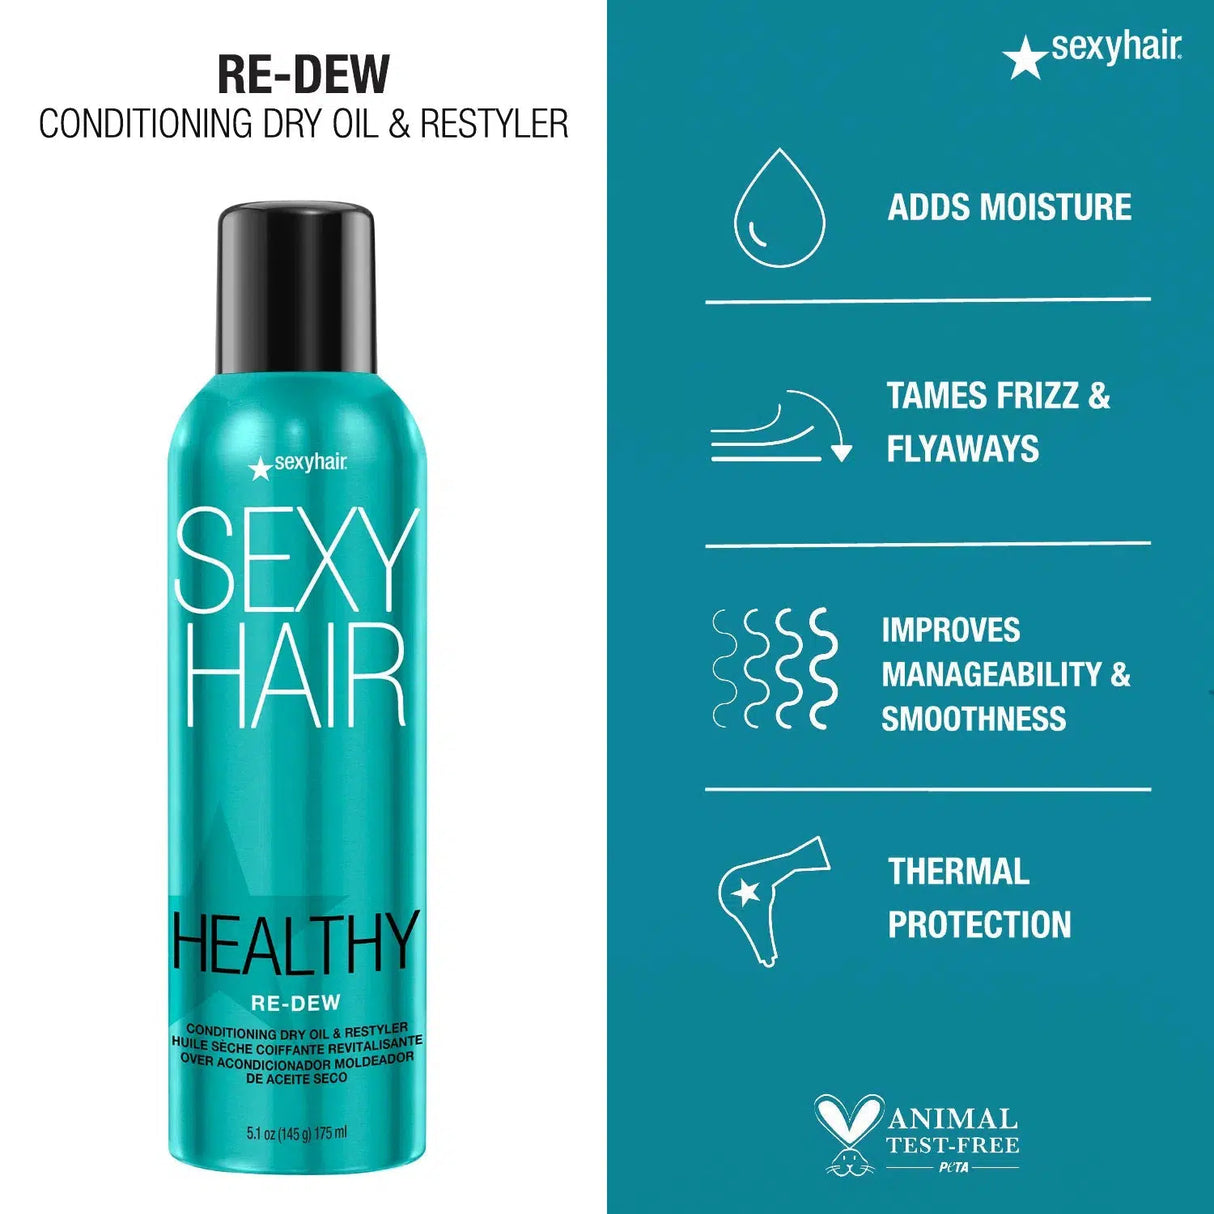 Re-Dew Conditioning Dry Oil & Restyler